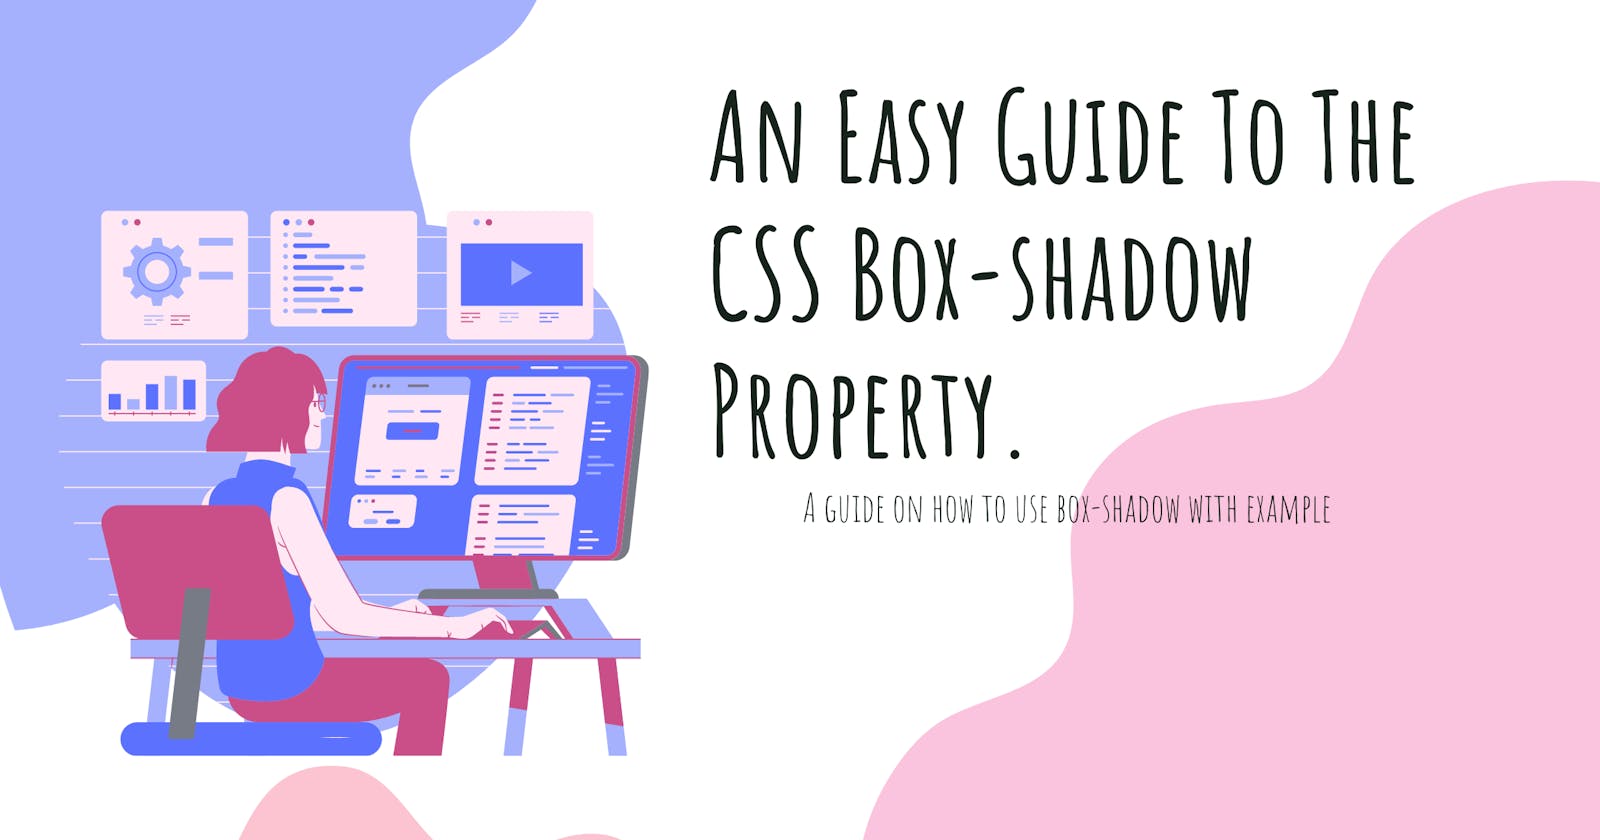 An Easy Guide To The CSS Box-shadow Property.